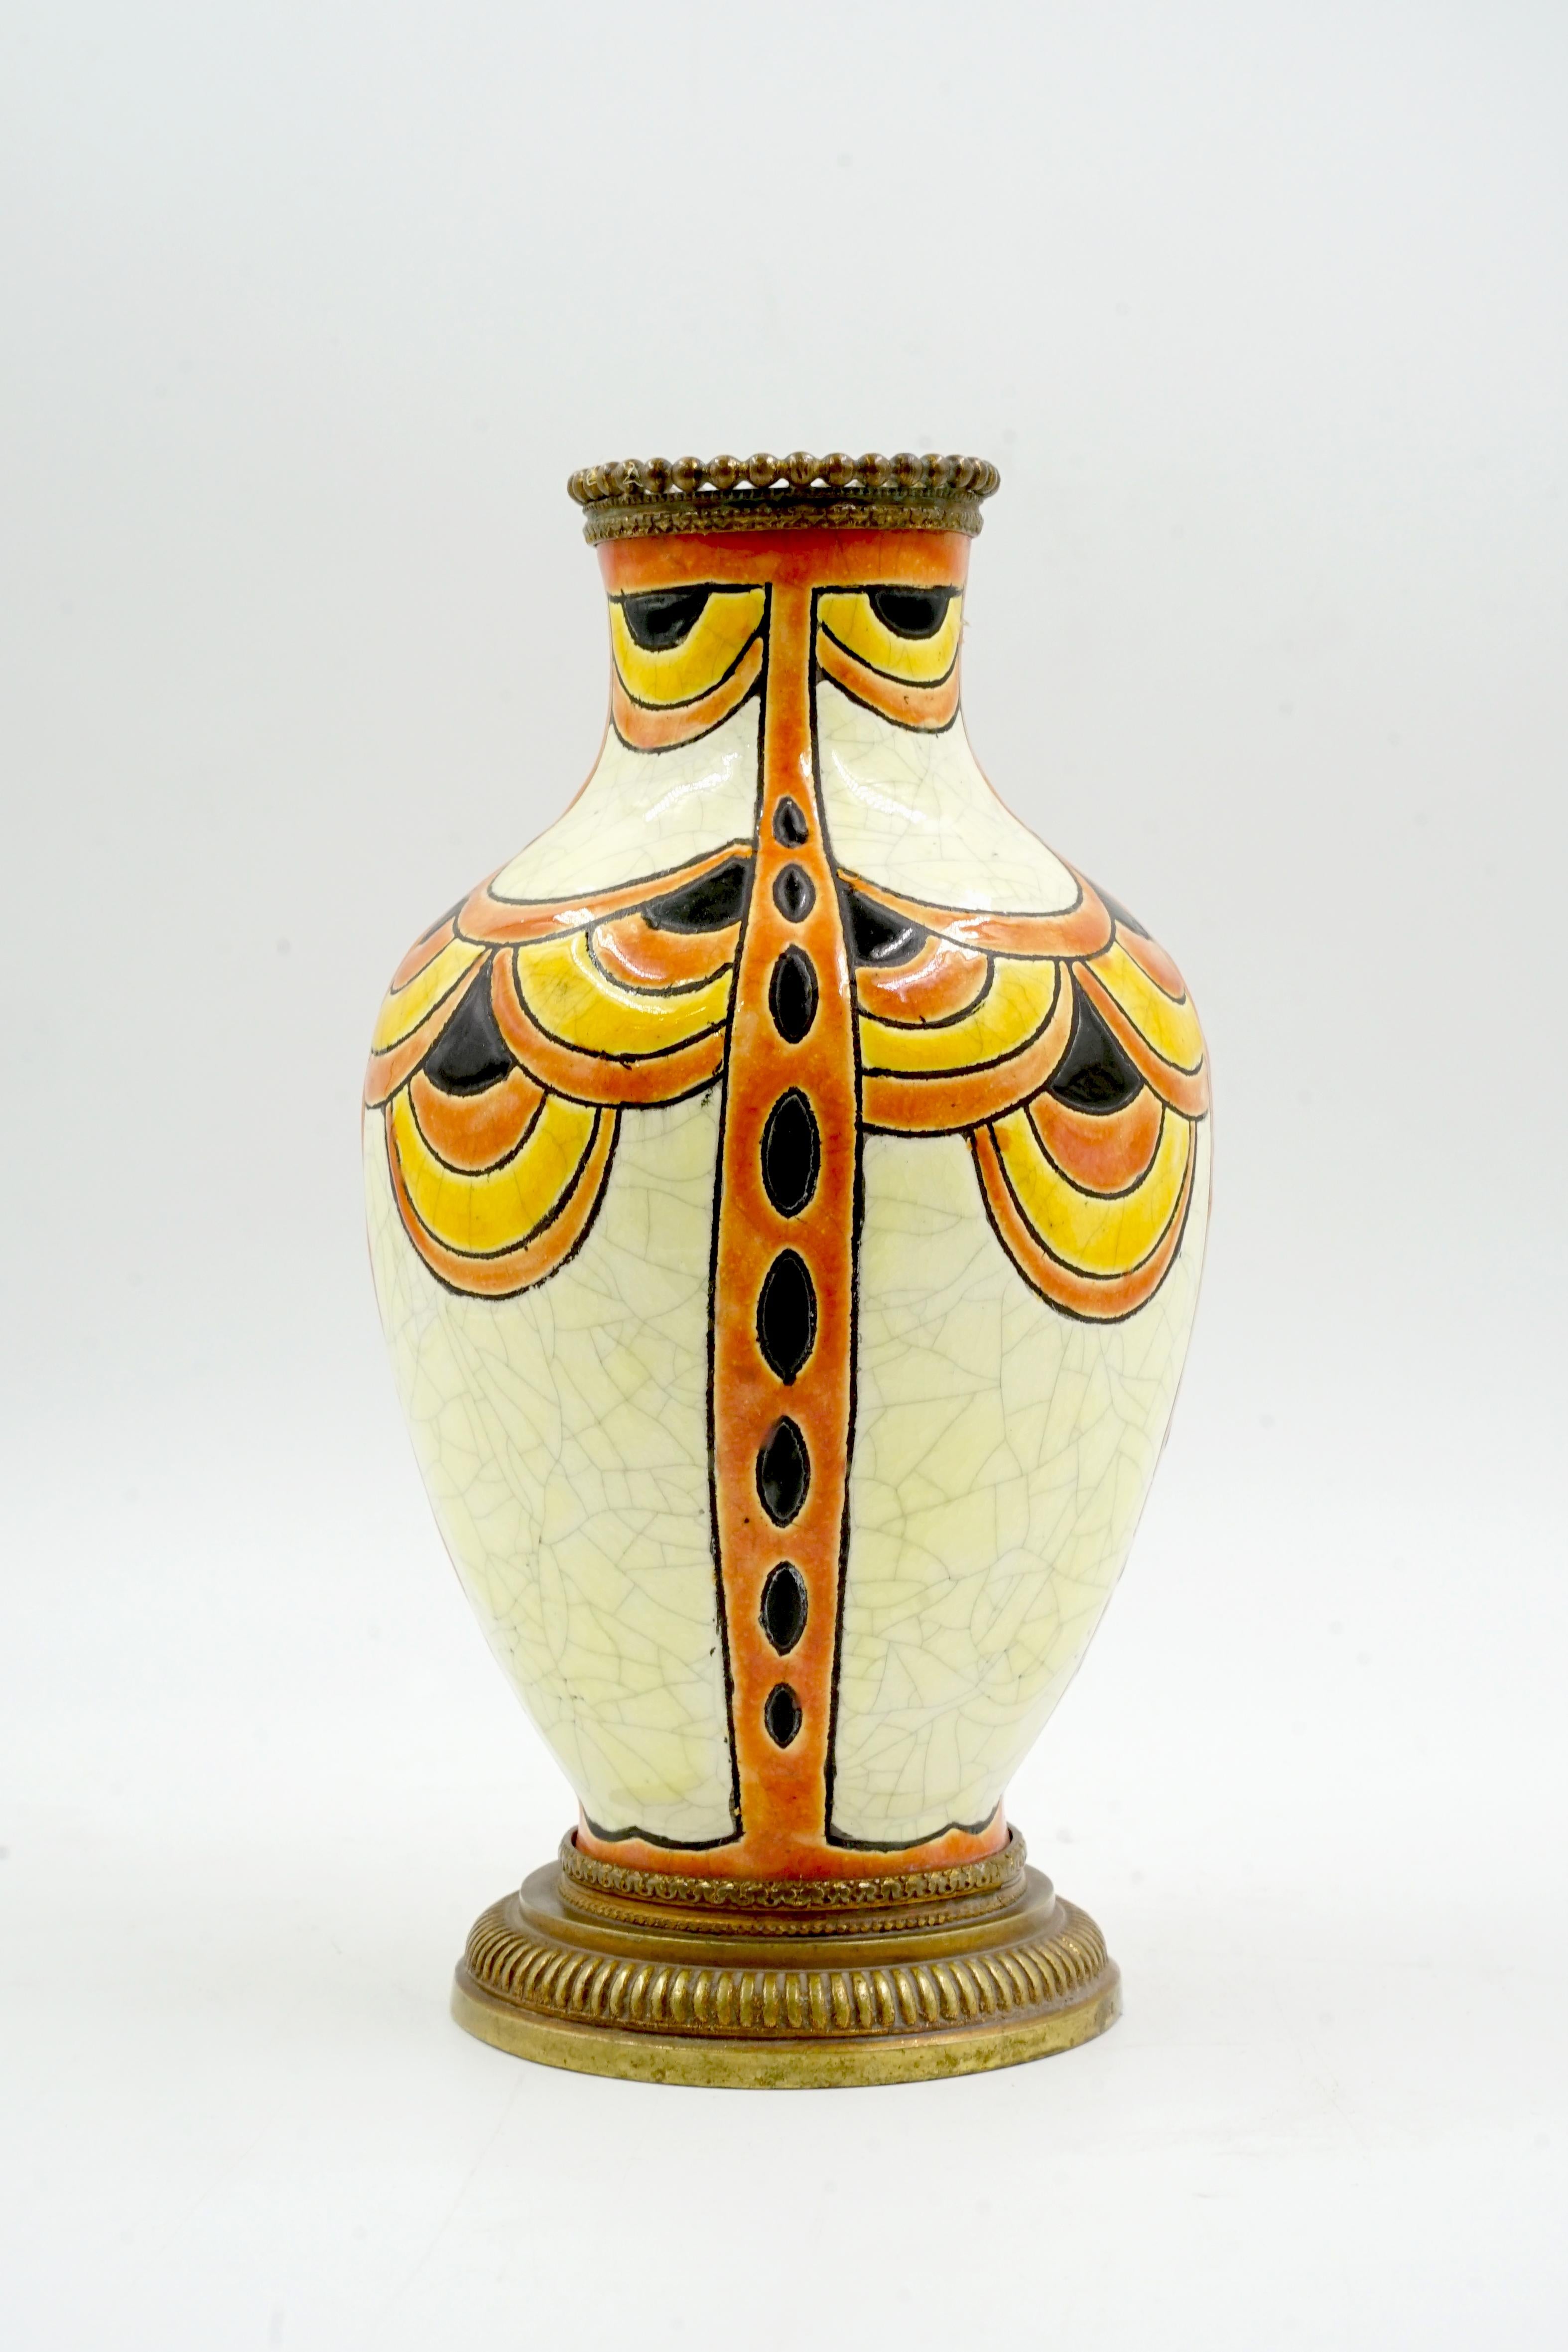 Art Deco Bosch Ceramics by Charles Catteau
Designer Charles Catteau
Origin Belgium Circa 1930
Materials: ceramic and bronze rings on the base and mouth
Excellent condition and without restorations
enamelled and hand-painted geometric motifs
Signed